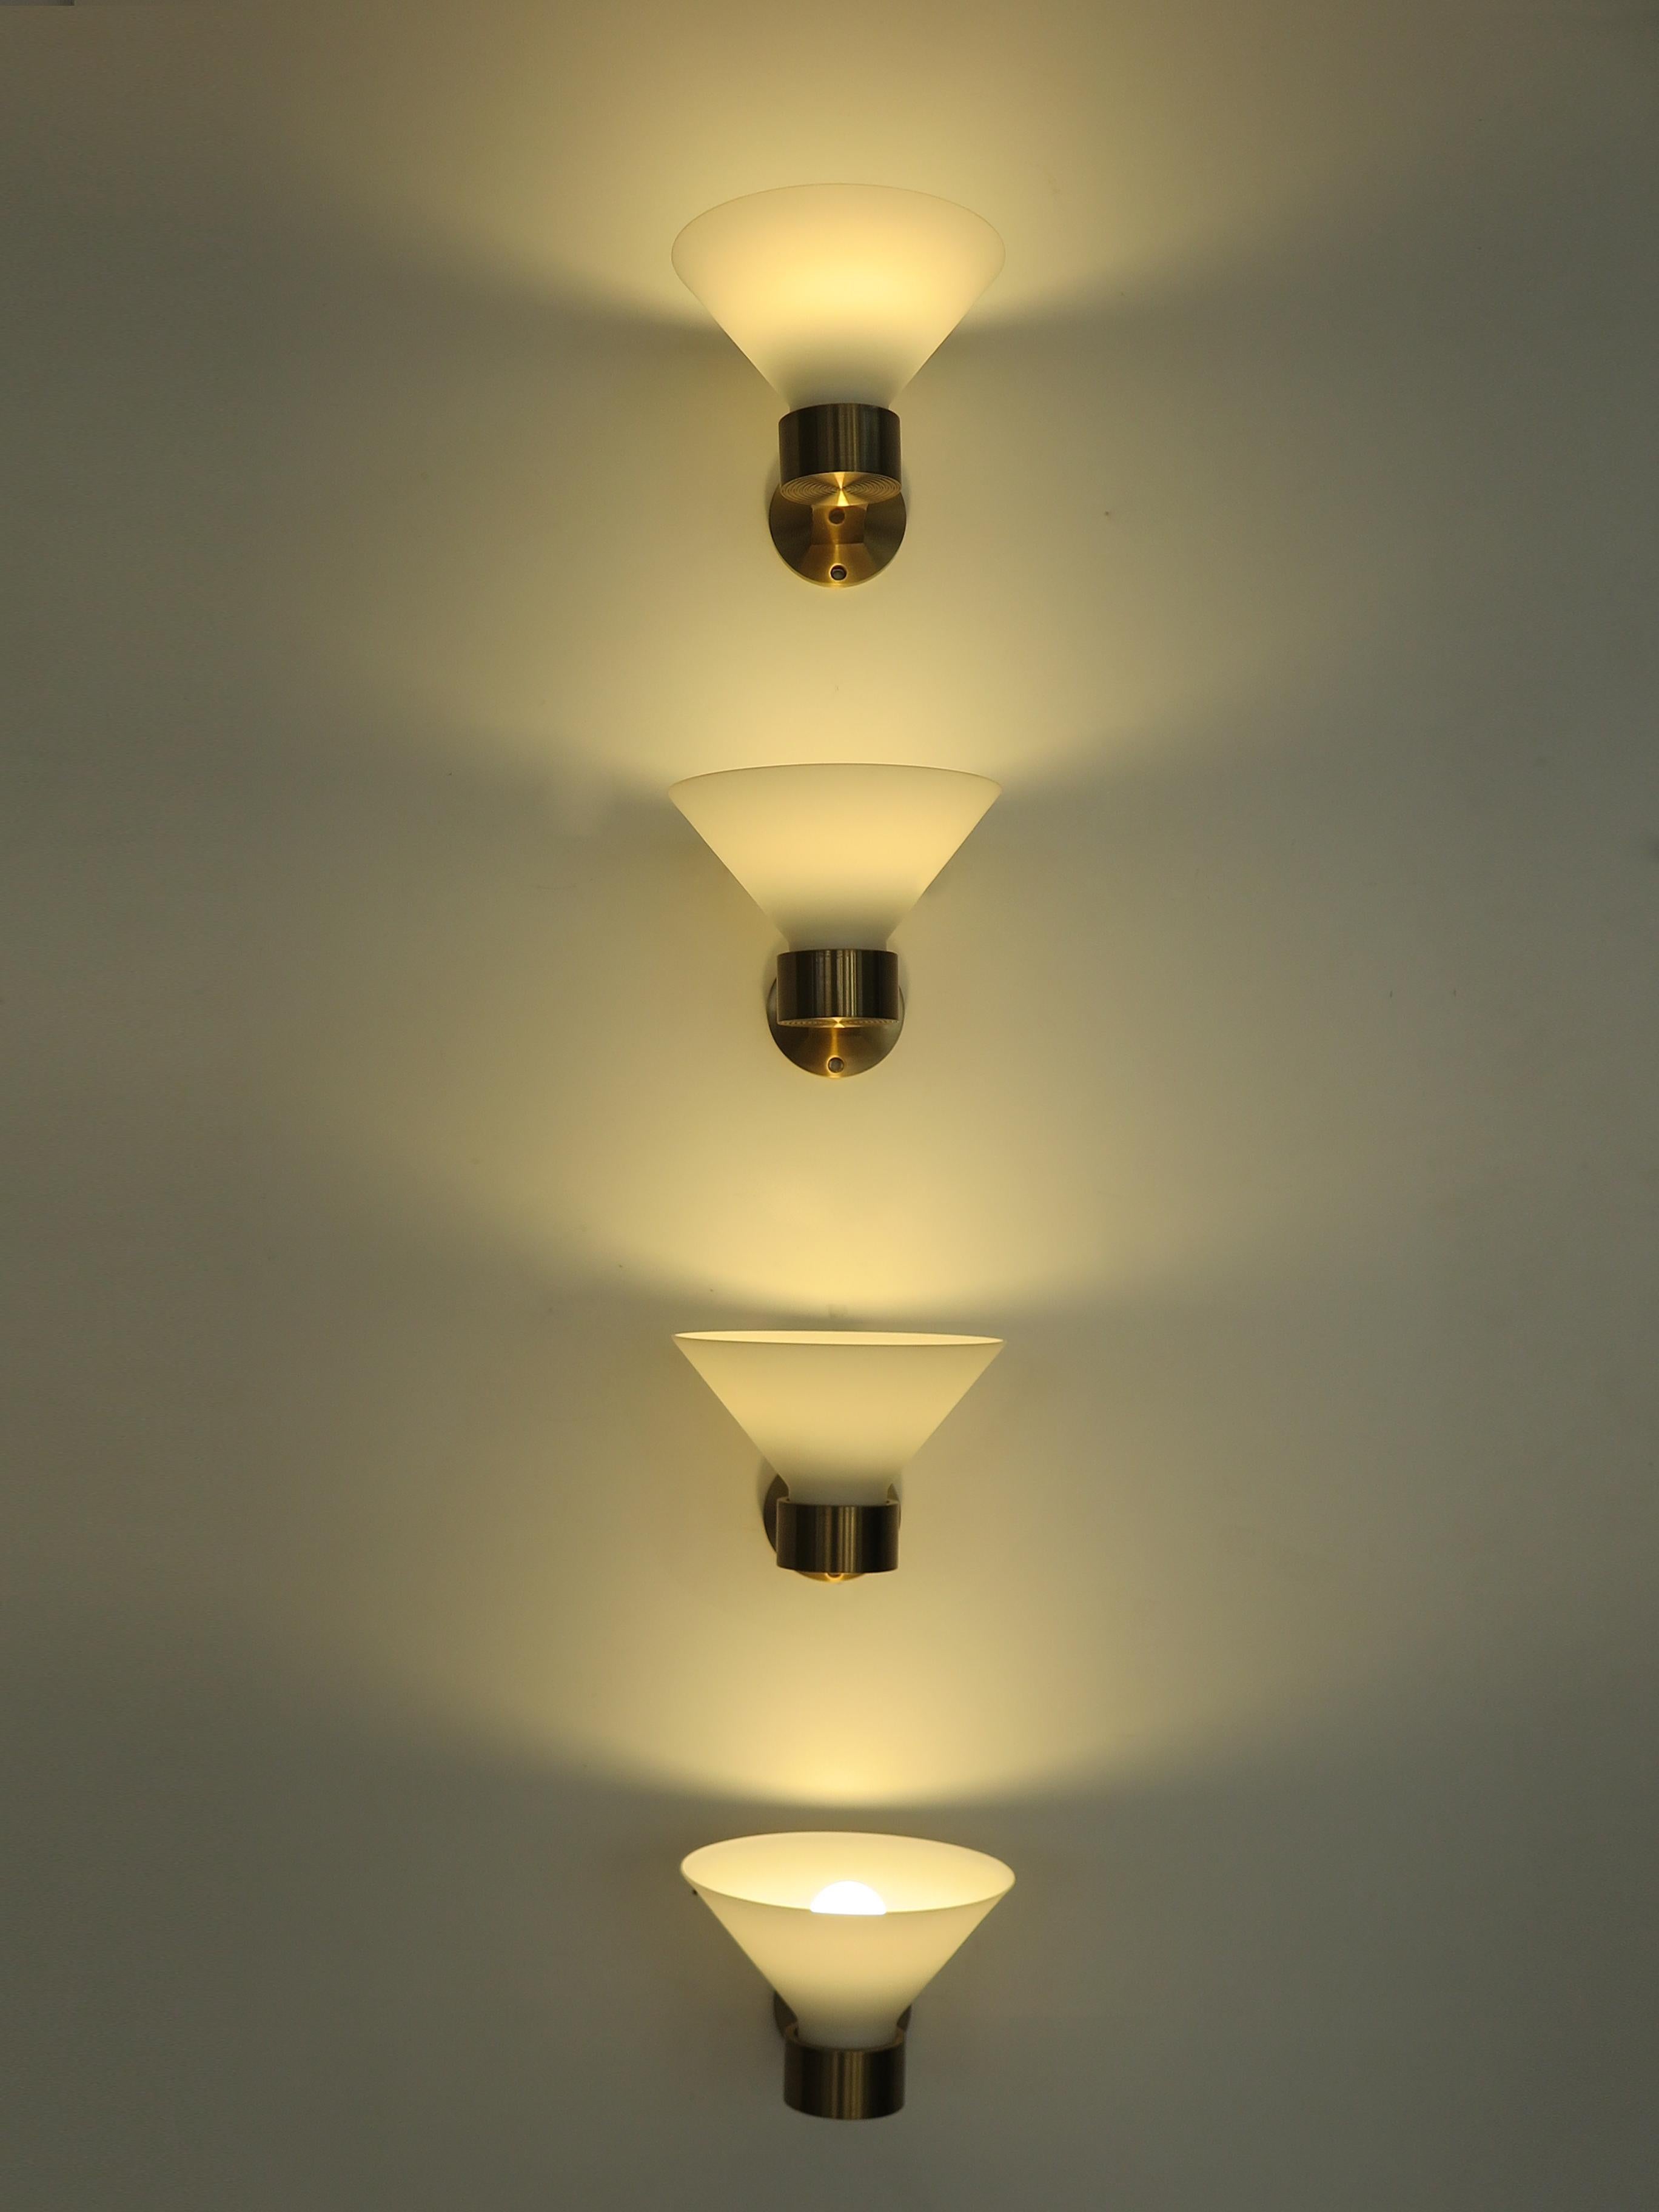 Set of four Italian wall sconces or wall lamps with solid brass frame and Murano glass lampshade, 1970s-1980s.